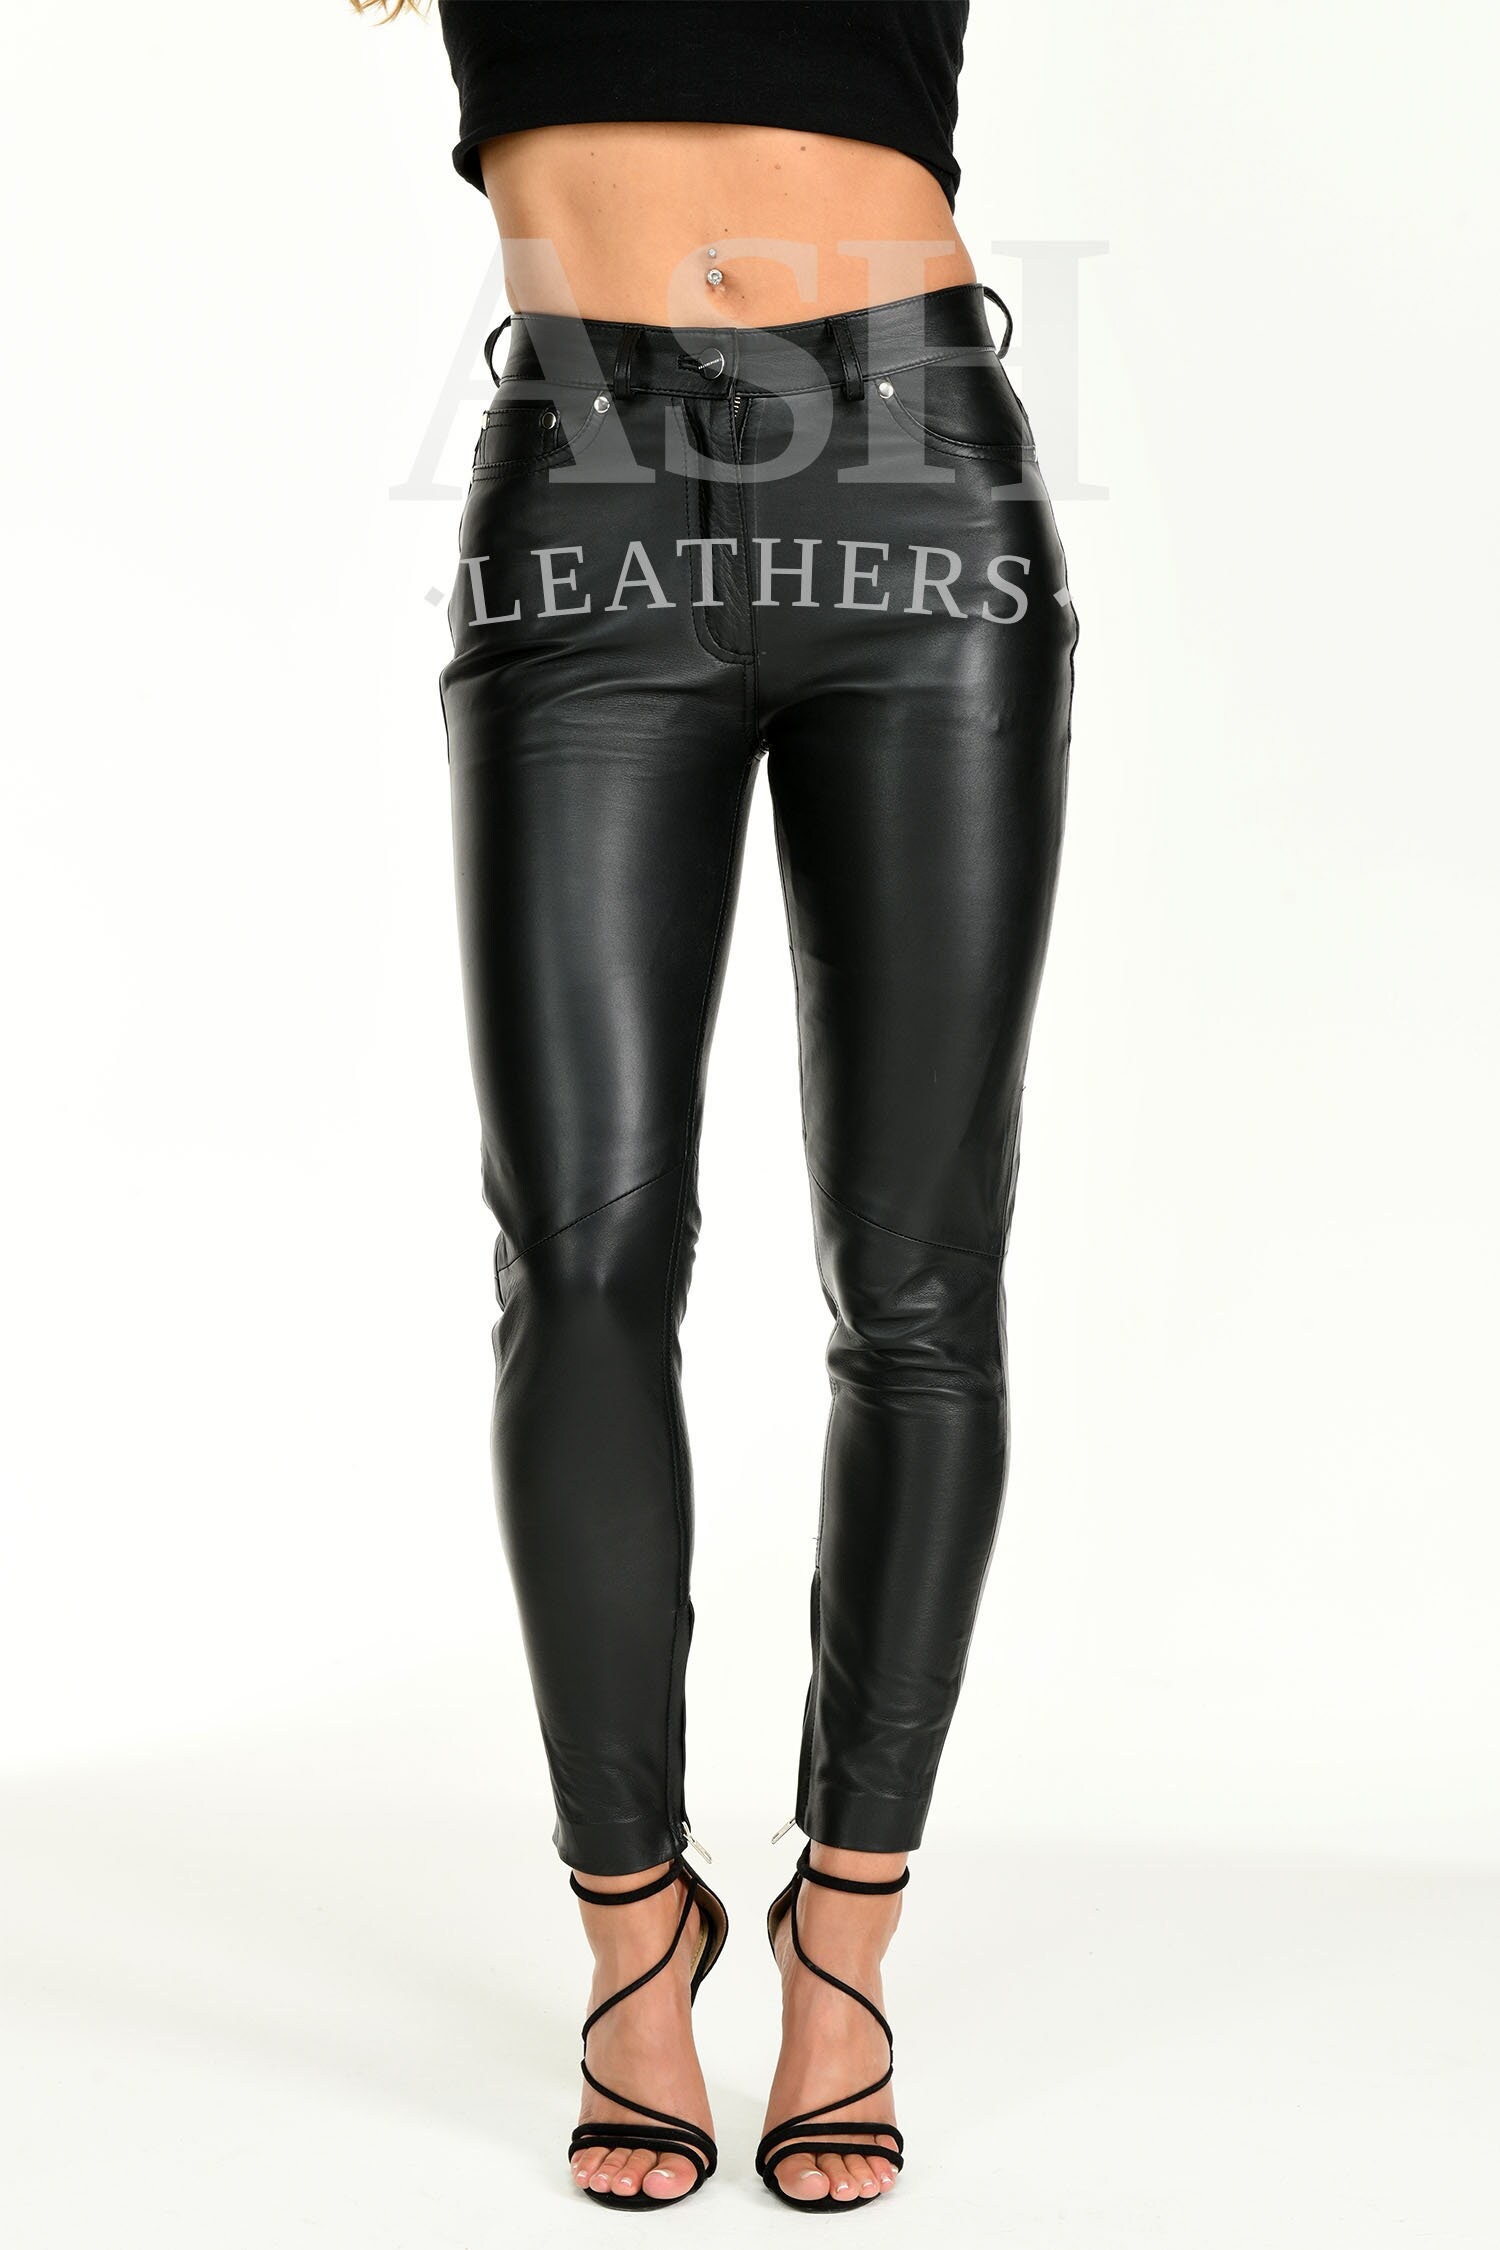 Red Leather Pants Women -  New Zealand